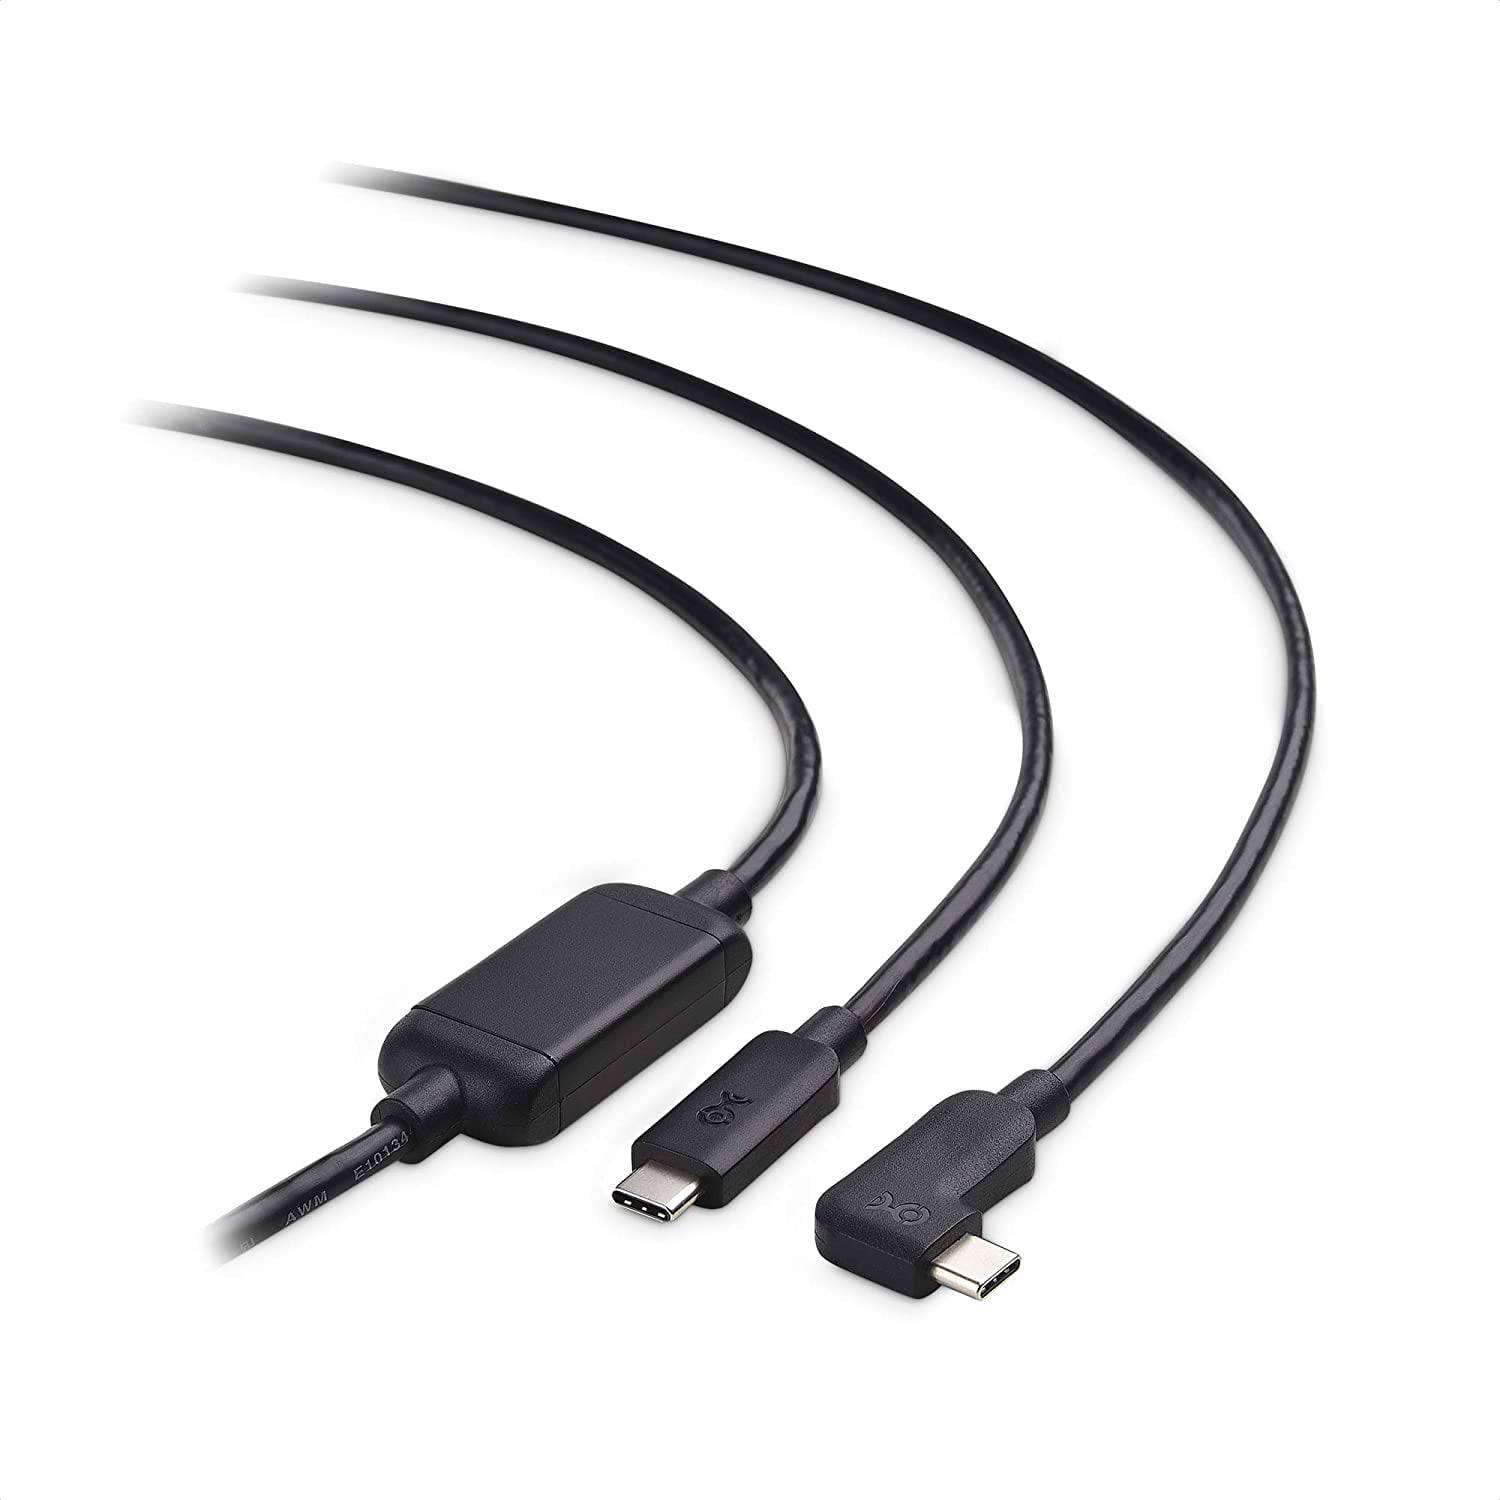 Matters Active USB C Cable for Oculus Quest 2 VR Headset and Hard Drives in 5 Meters / 16.4 Feet - Not Compatible with Monitors or Docking Stations - Walmart.com